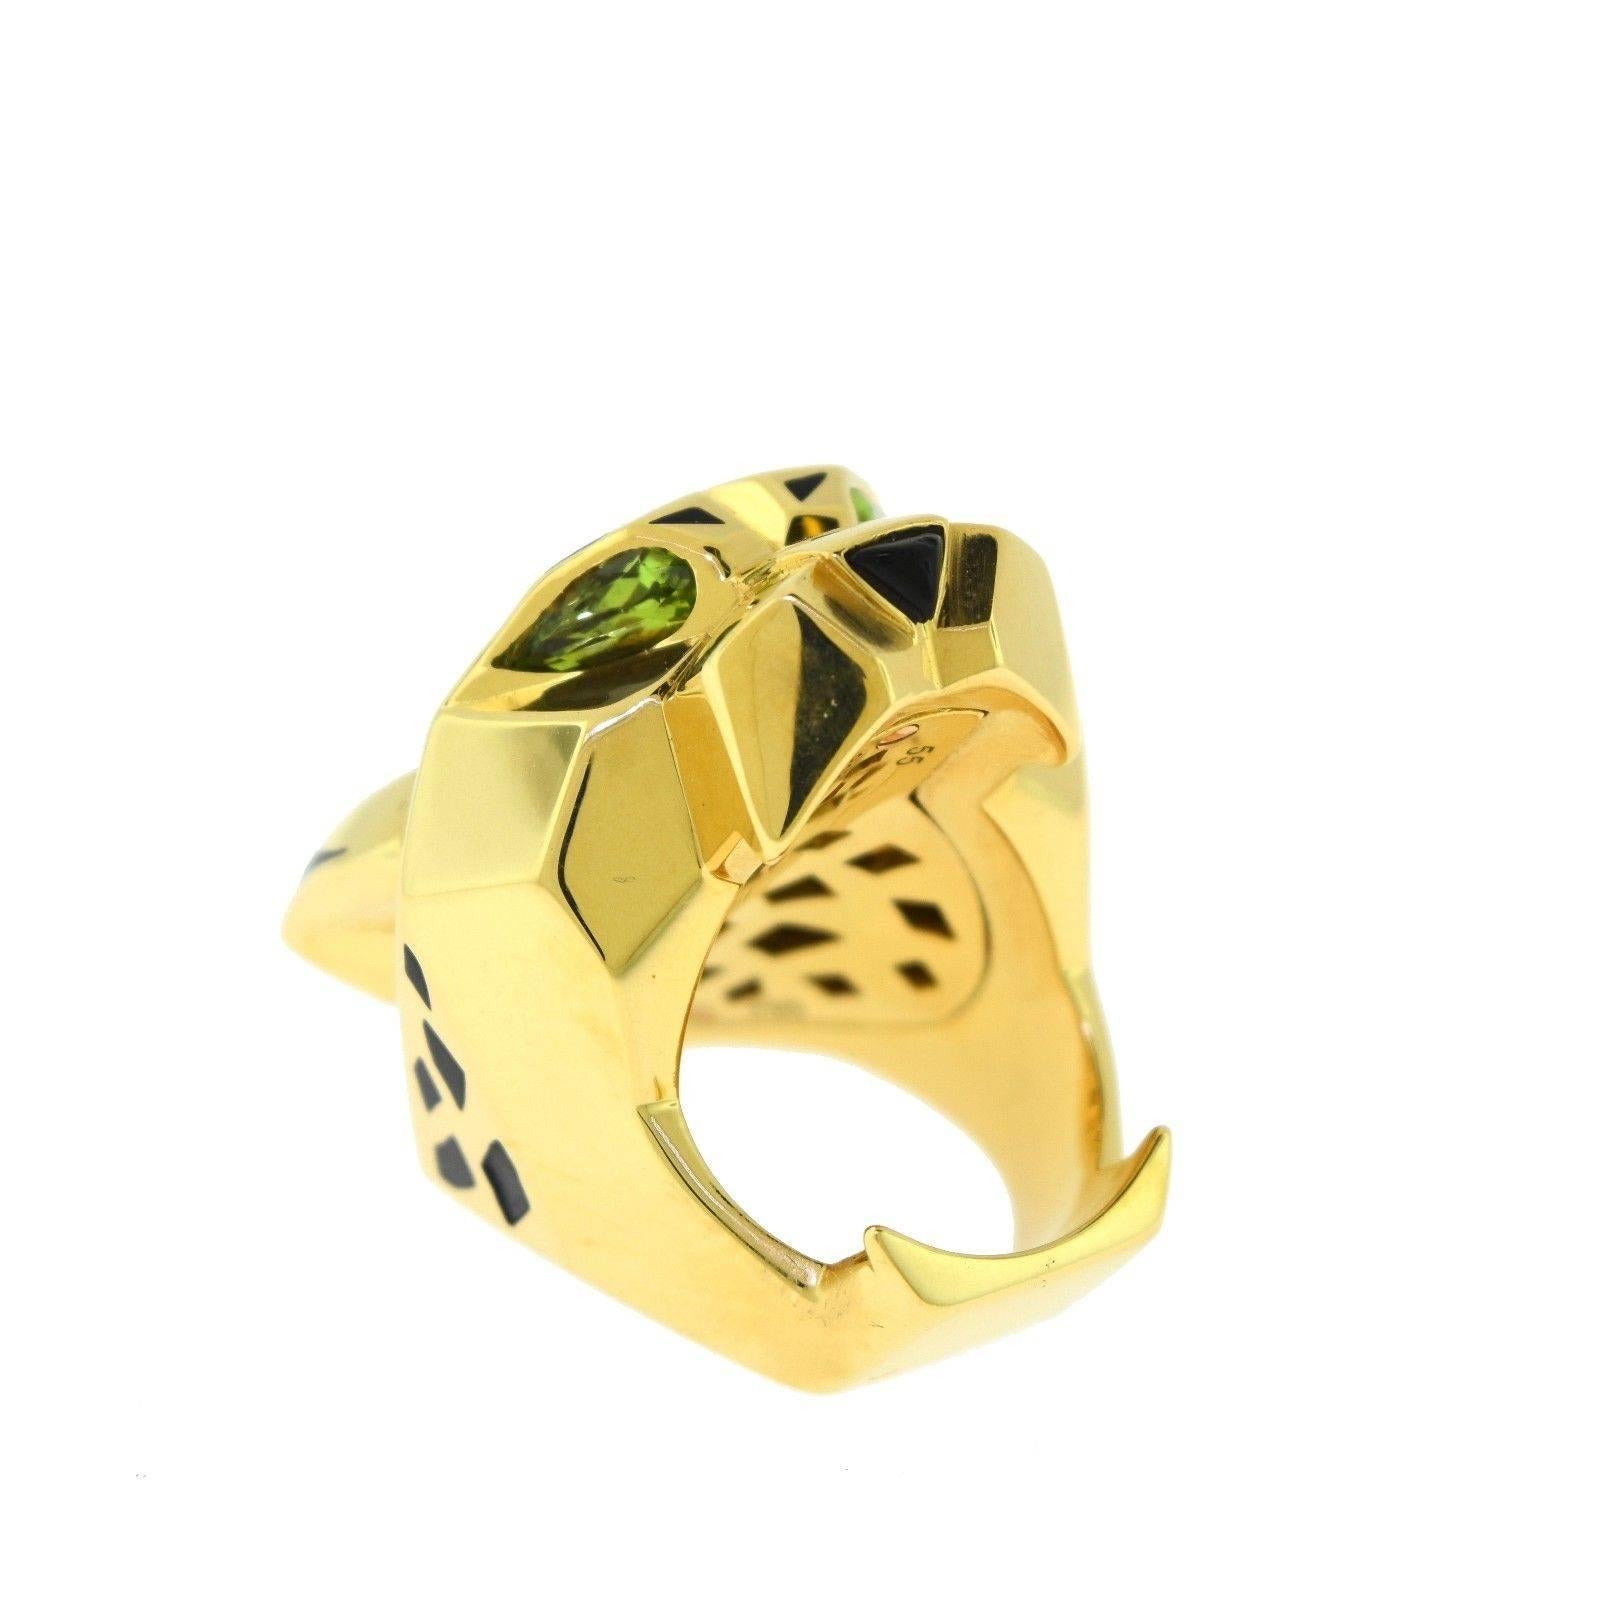 Set in 18k Yellow Gold, this Cartier ring from the Panther collection is a MUST. With Onyx and Peridot stones, the ring weighs a total of 63.0 grams and is a size 55 in euro sizes and 7.25 in US. 